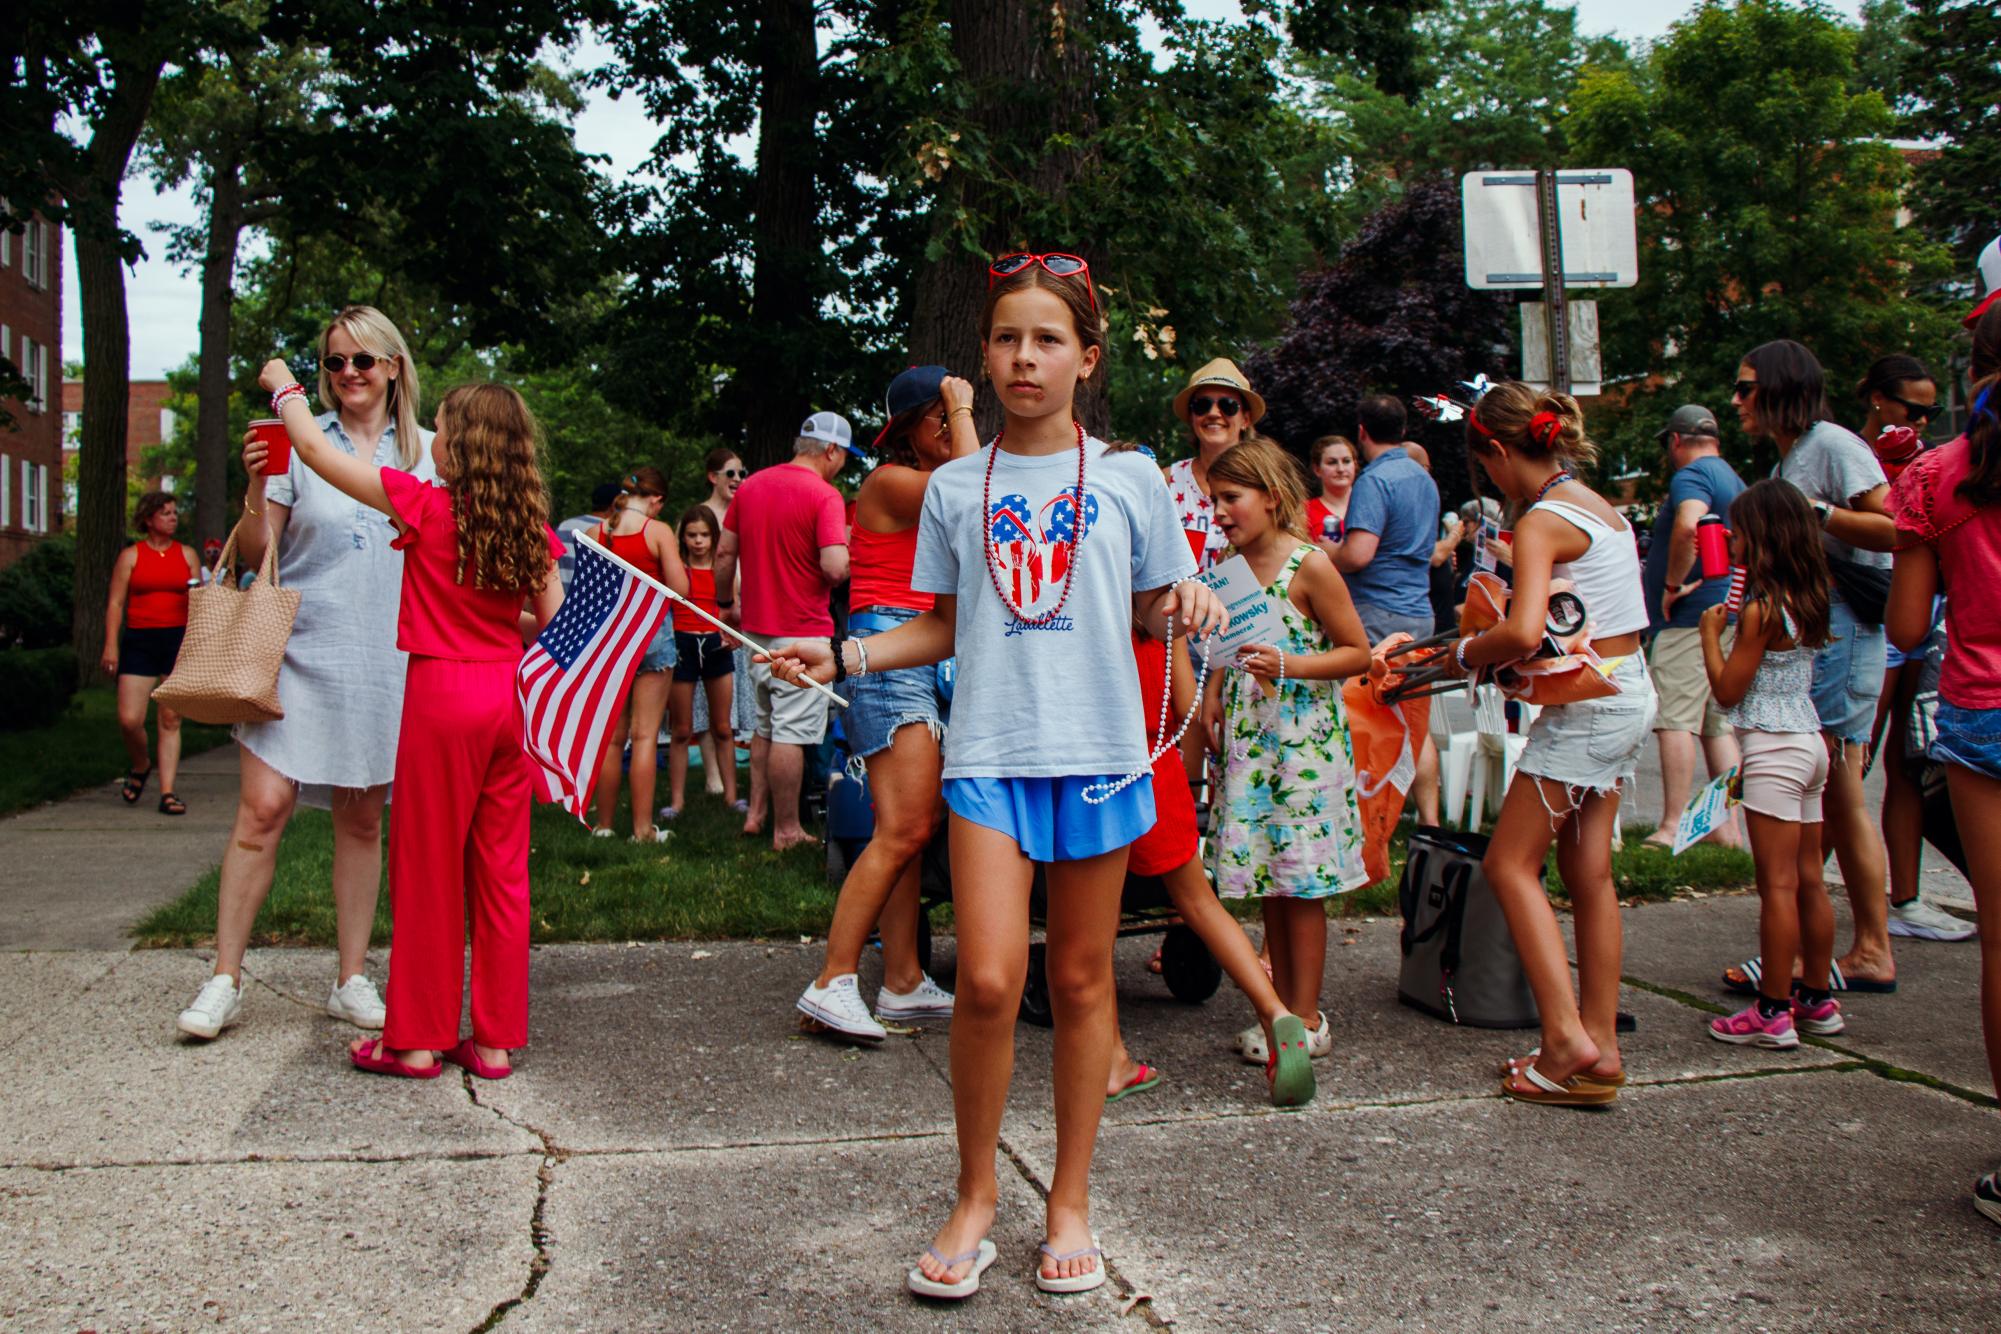 Parade-goers gathered on Central Street Thursday for Evanstons 101st annual Fourth of July Celebration